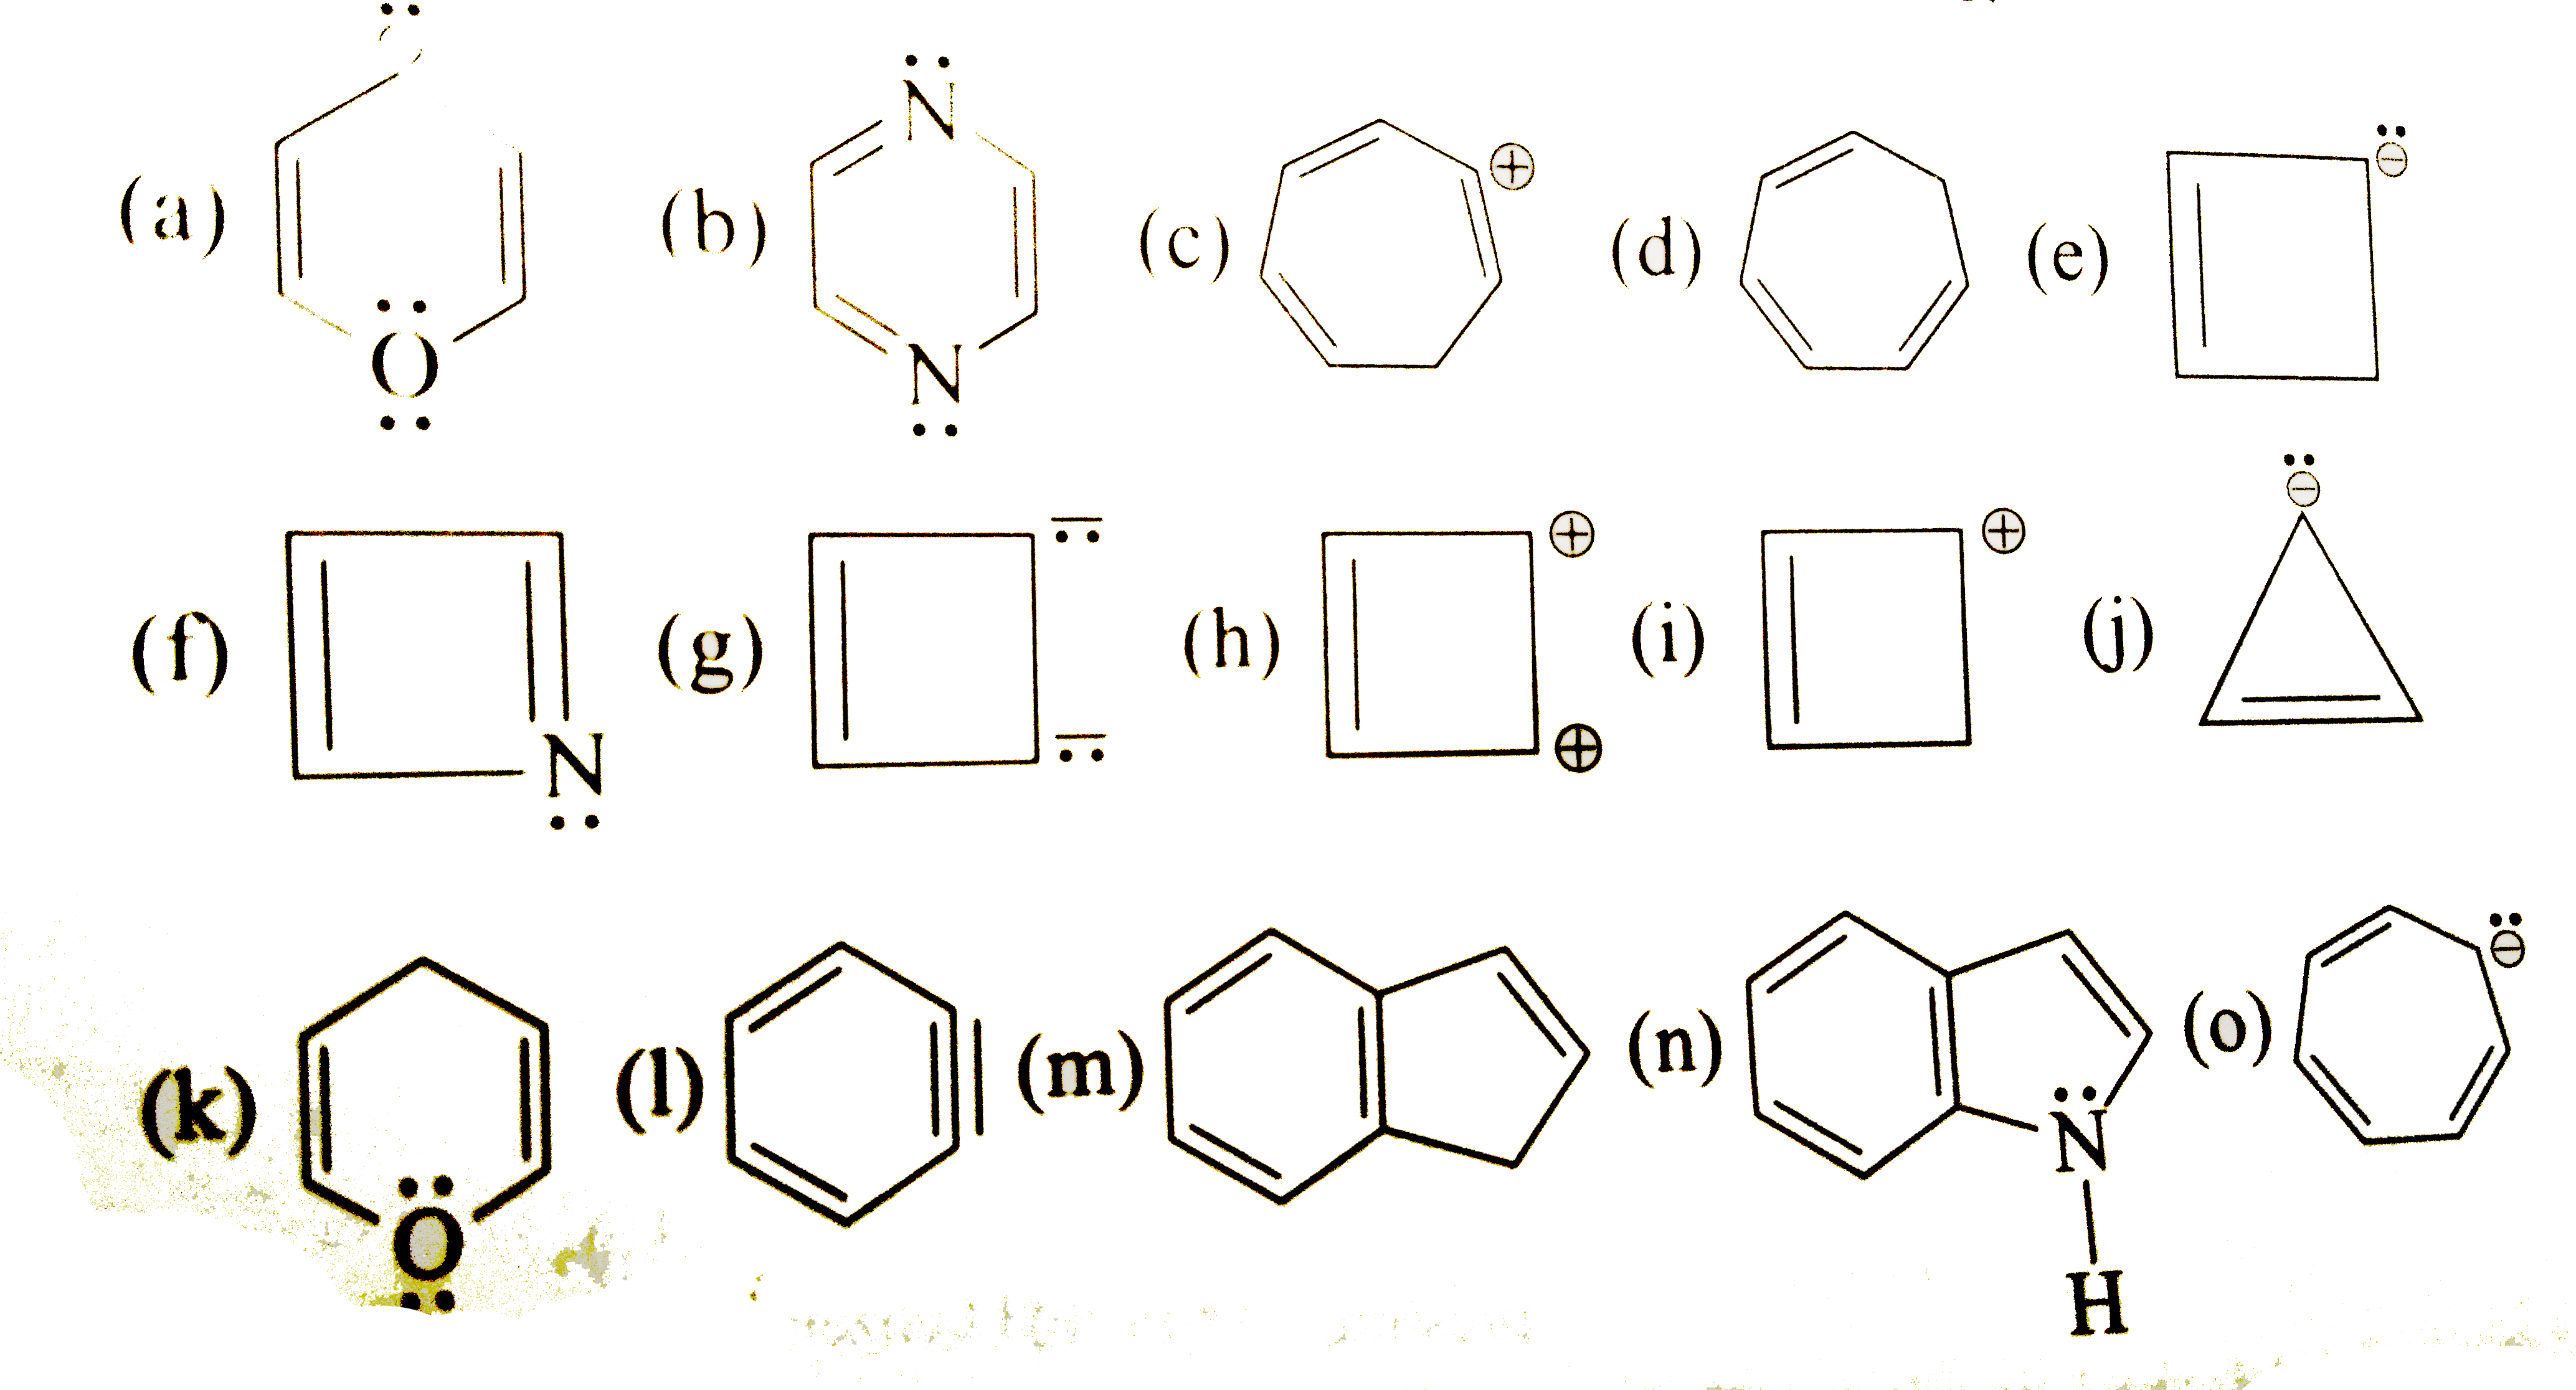 Among the given compounds, identify aromatic, anti-aromatic and non-aromatic molecules.